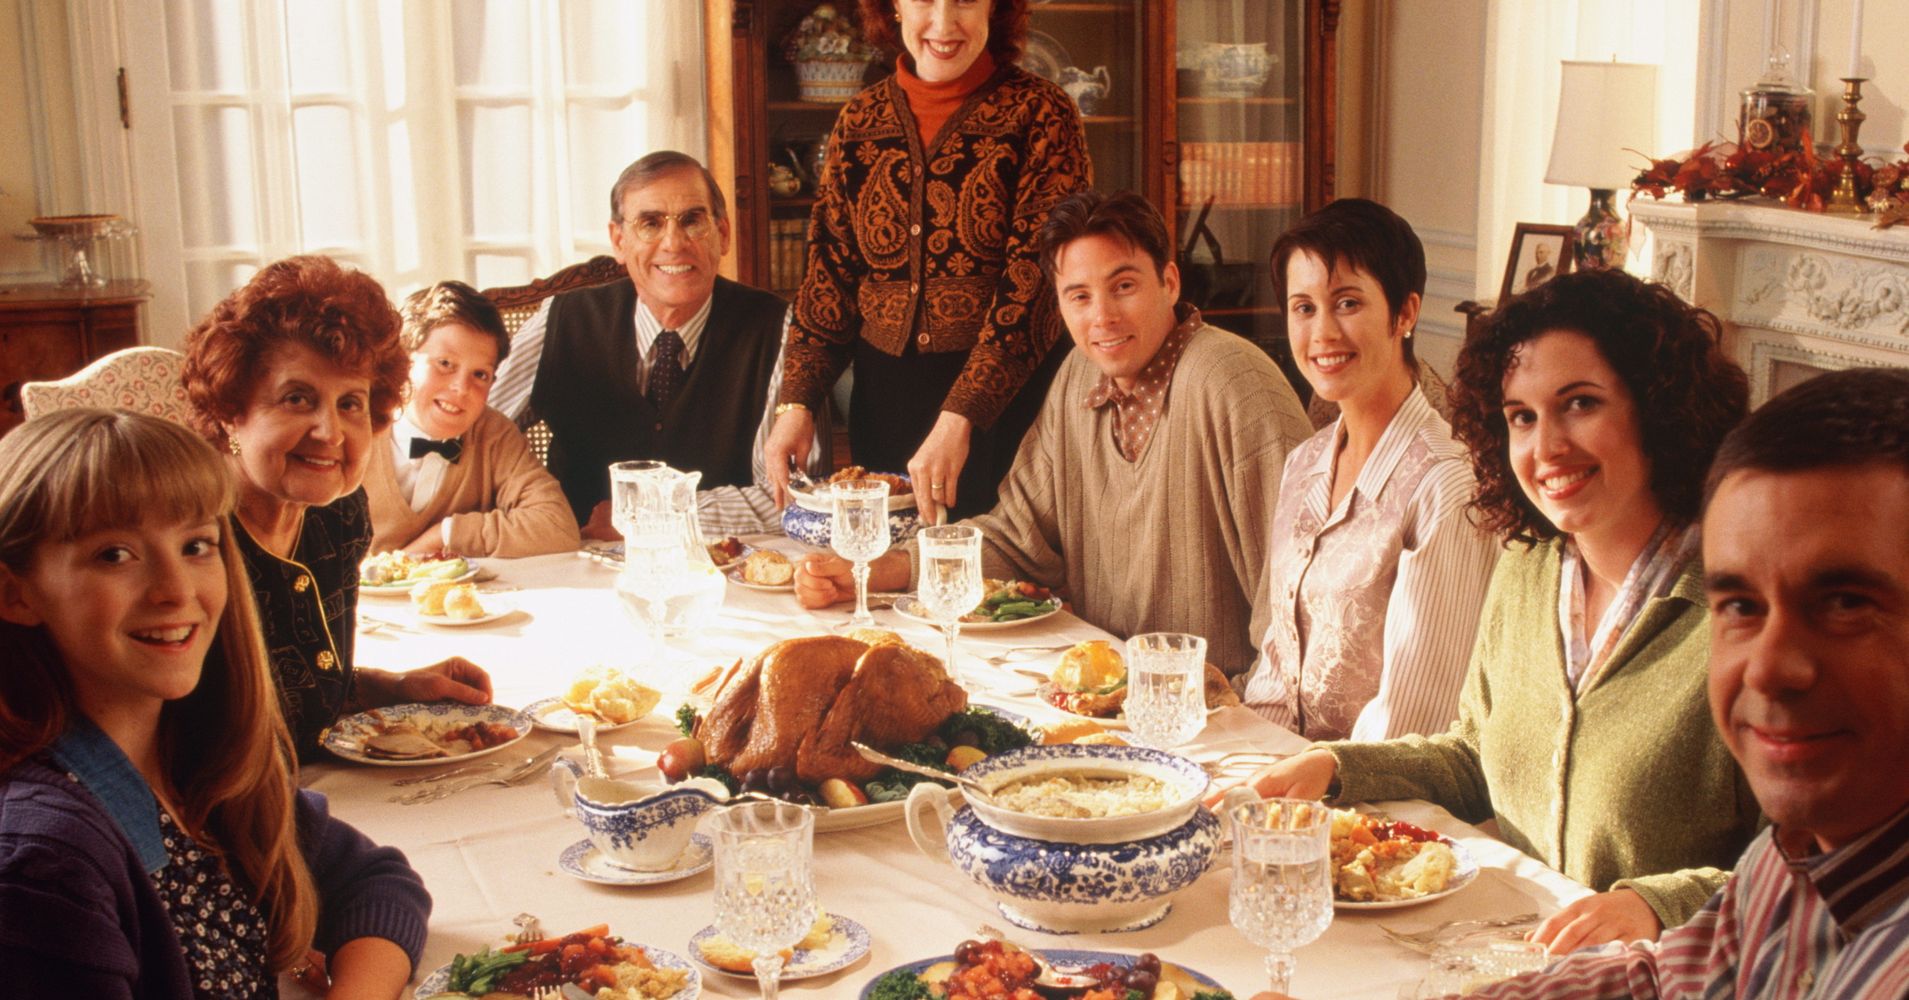 Why Aren't There More Movies About Thanksgiving? HuffPost